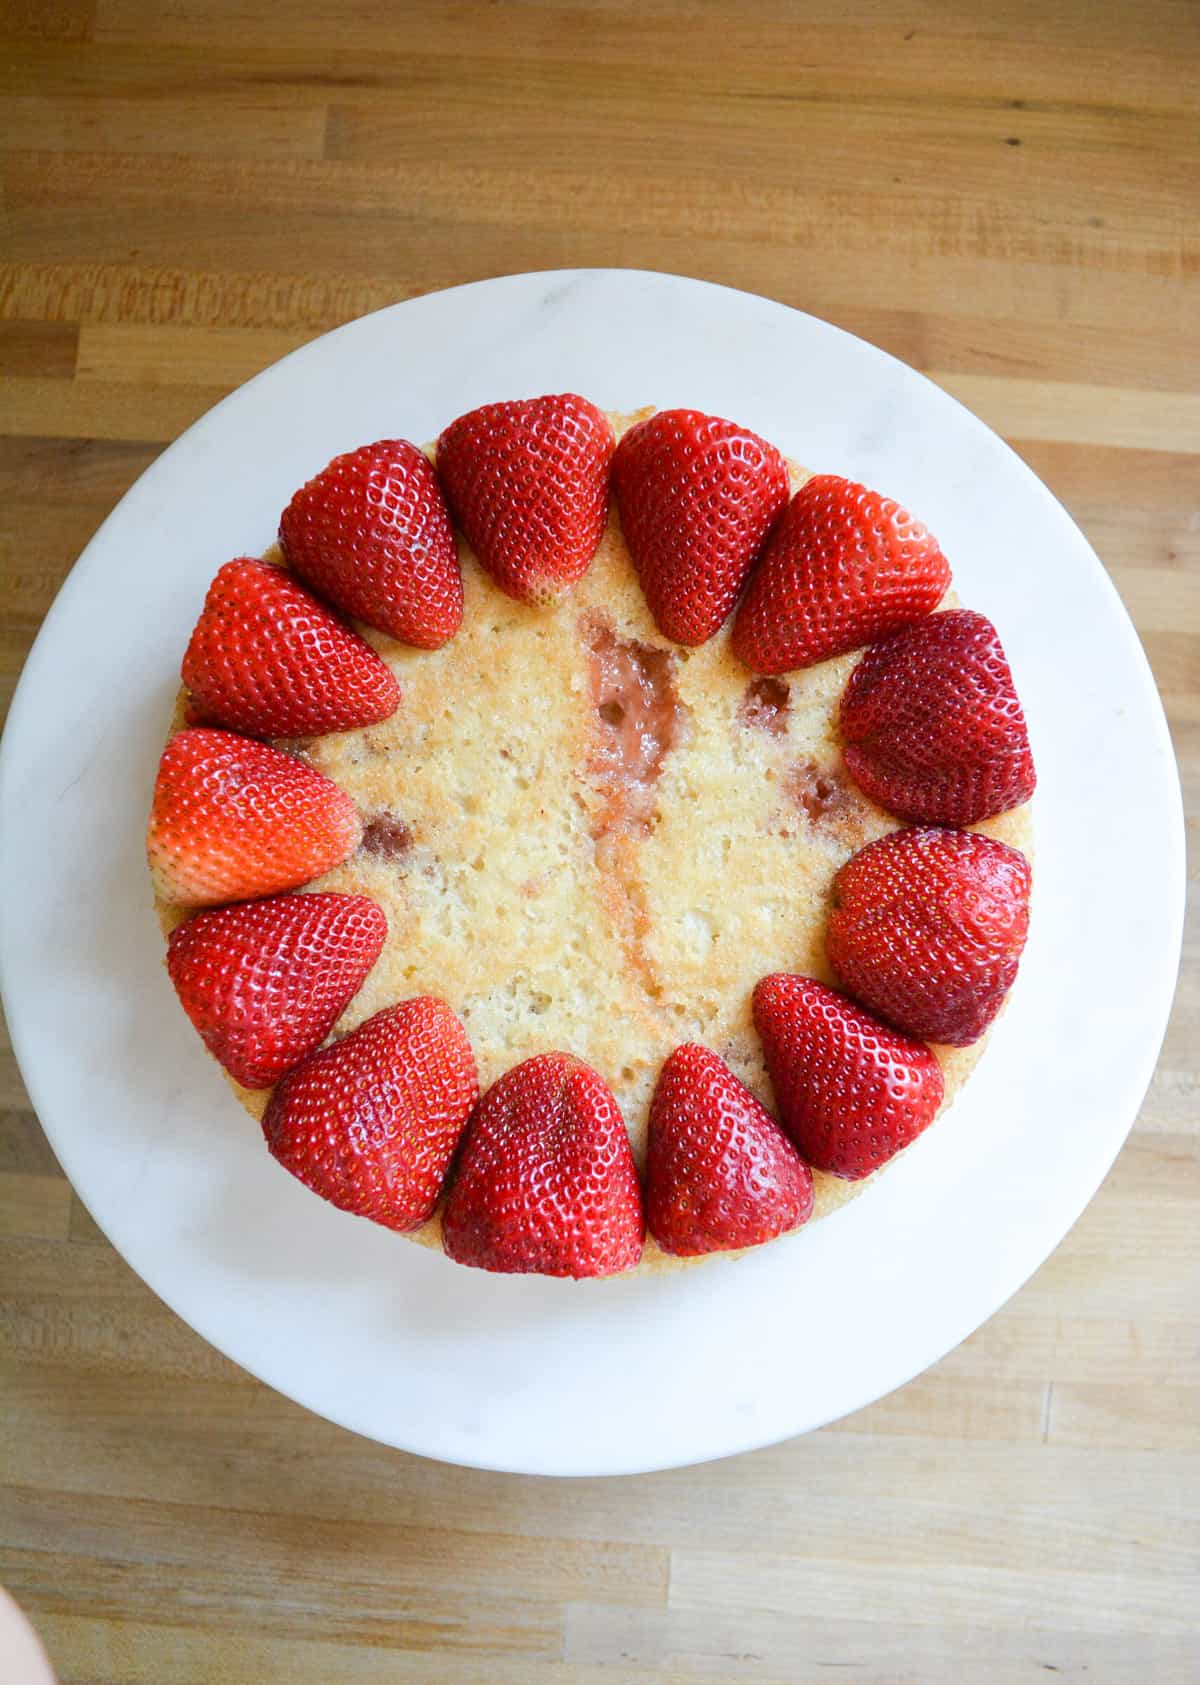 Strawberries lining the perimeter of a cake layer